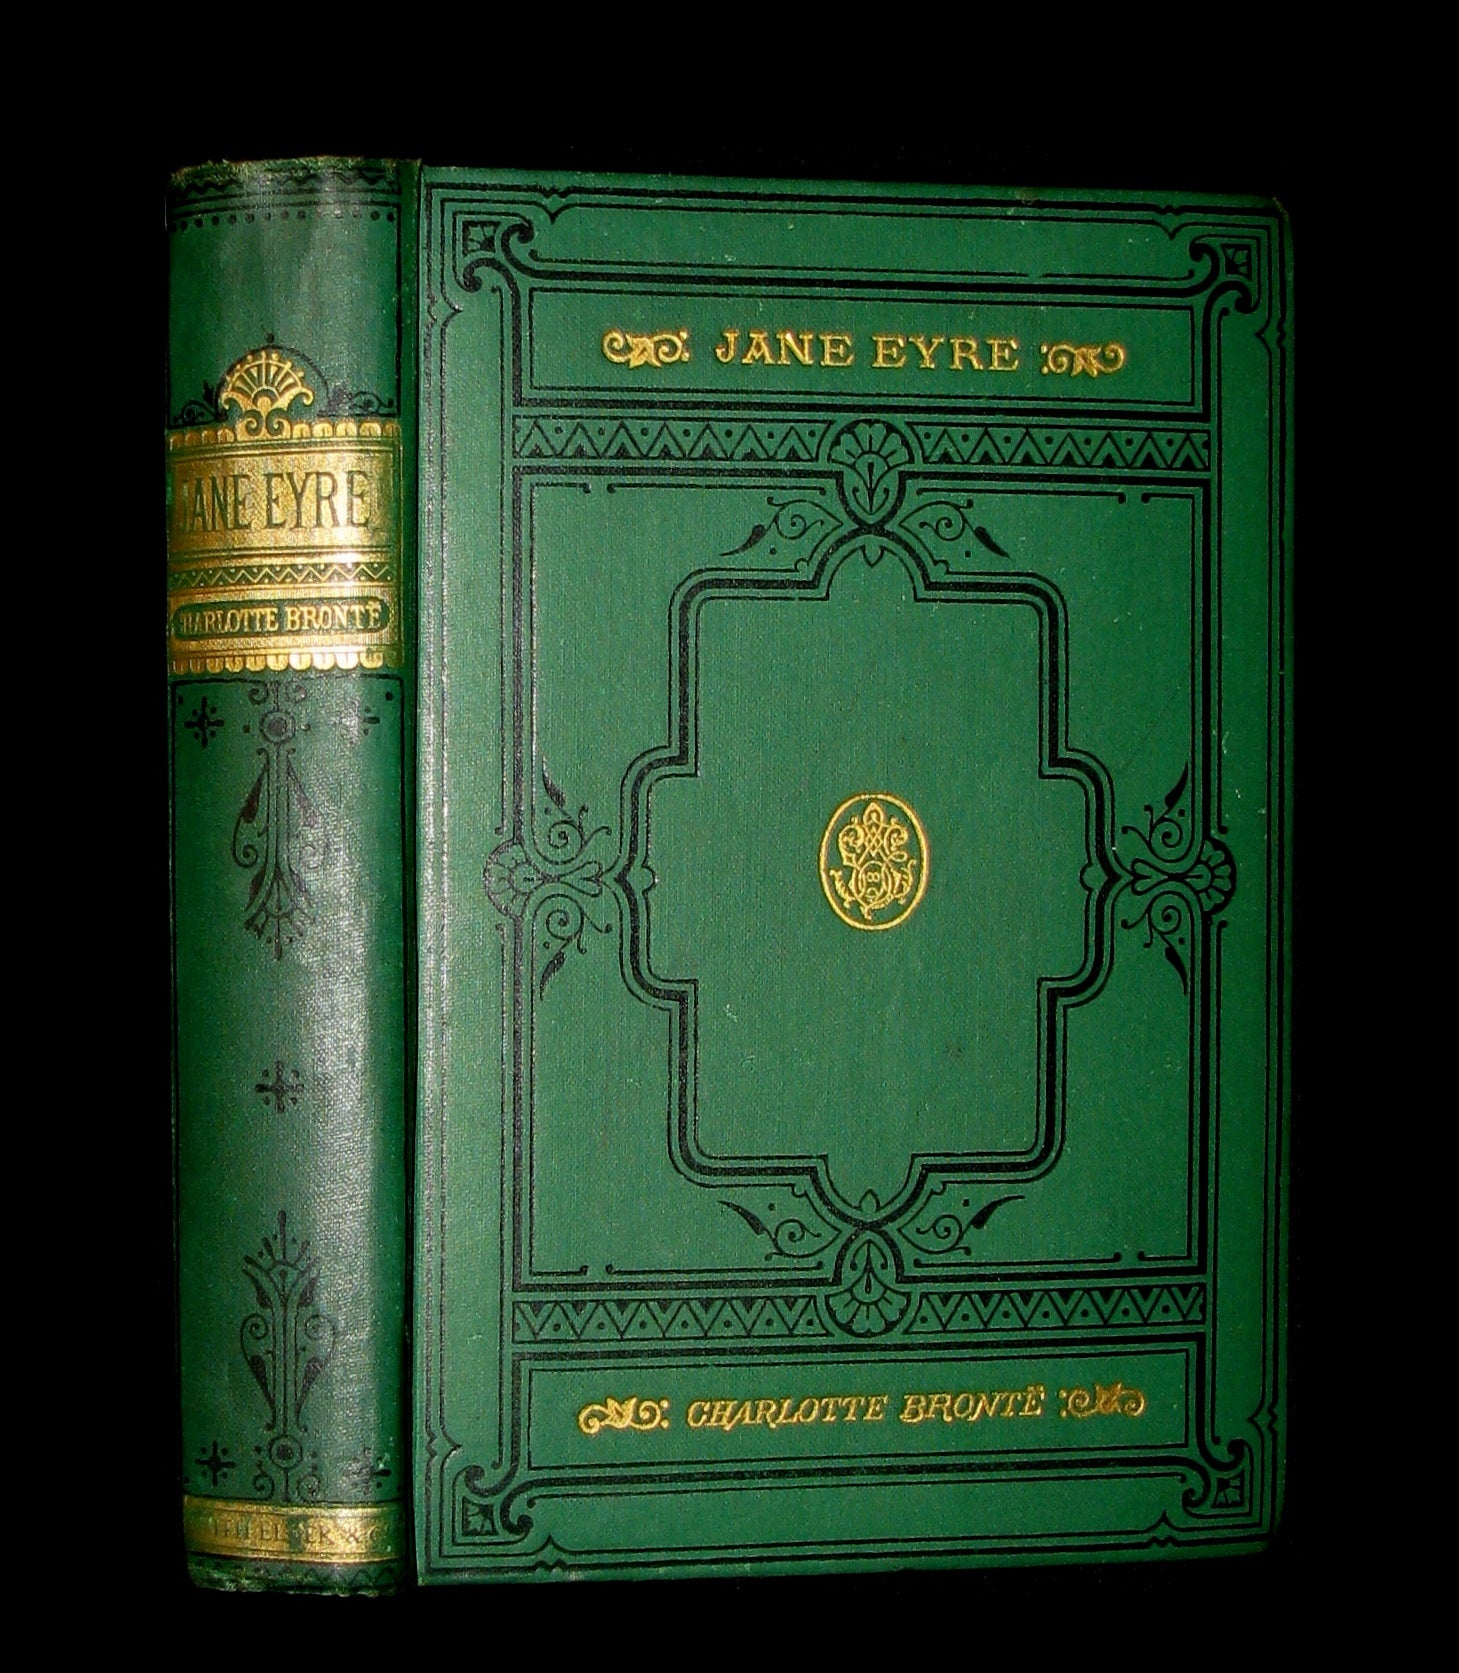 1886 Rare Victorian Book - JANE EYRE. An Autobiography by Currer Bell (CHARLOTTE BRONTË).